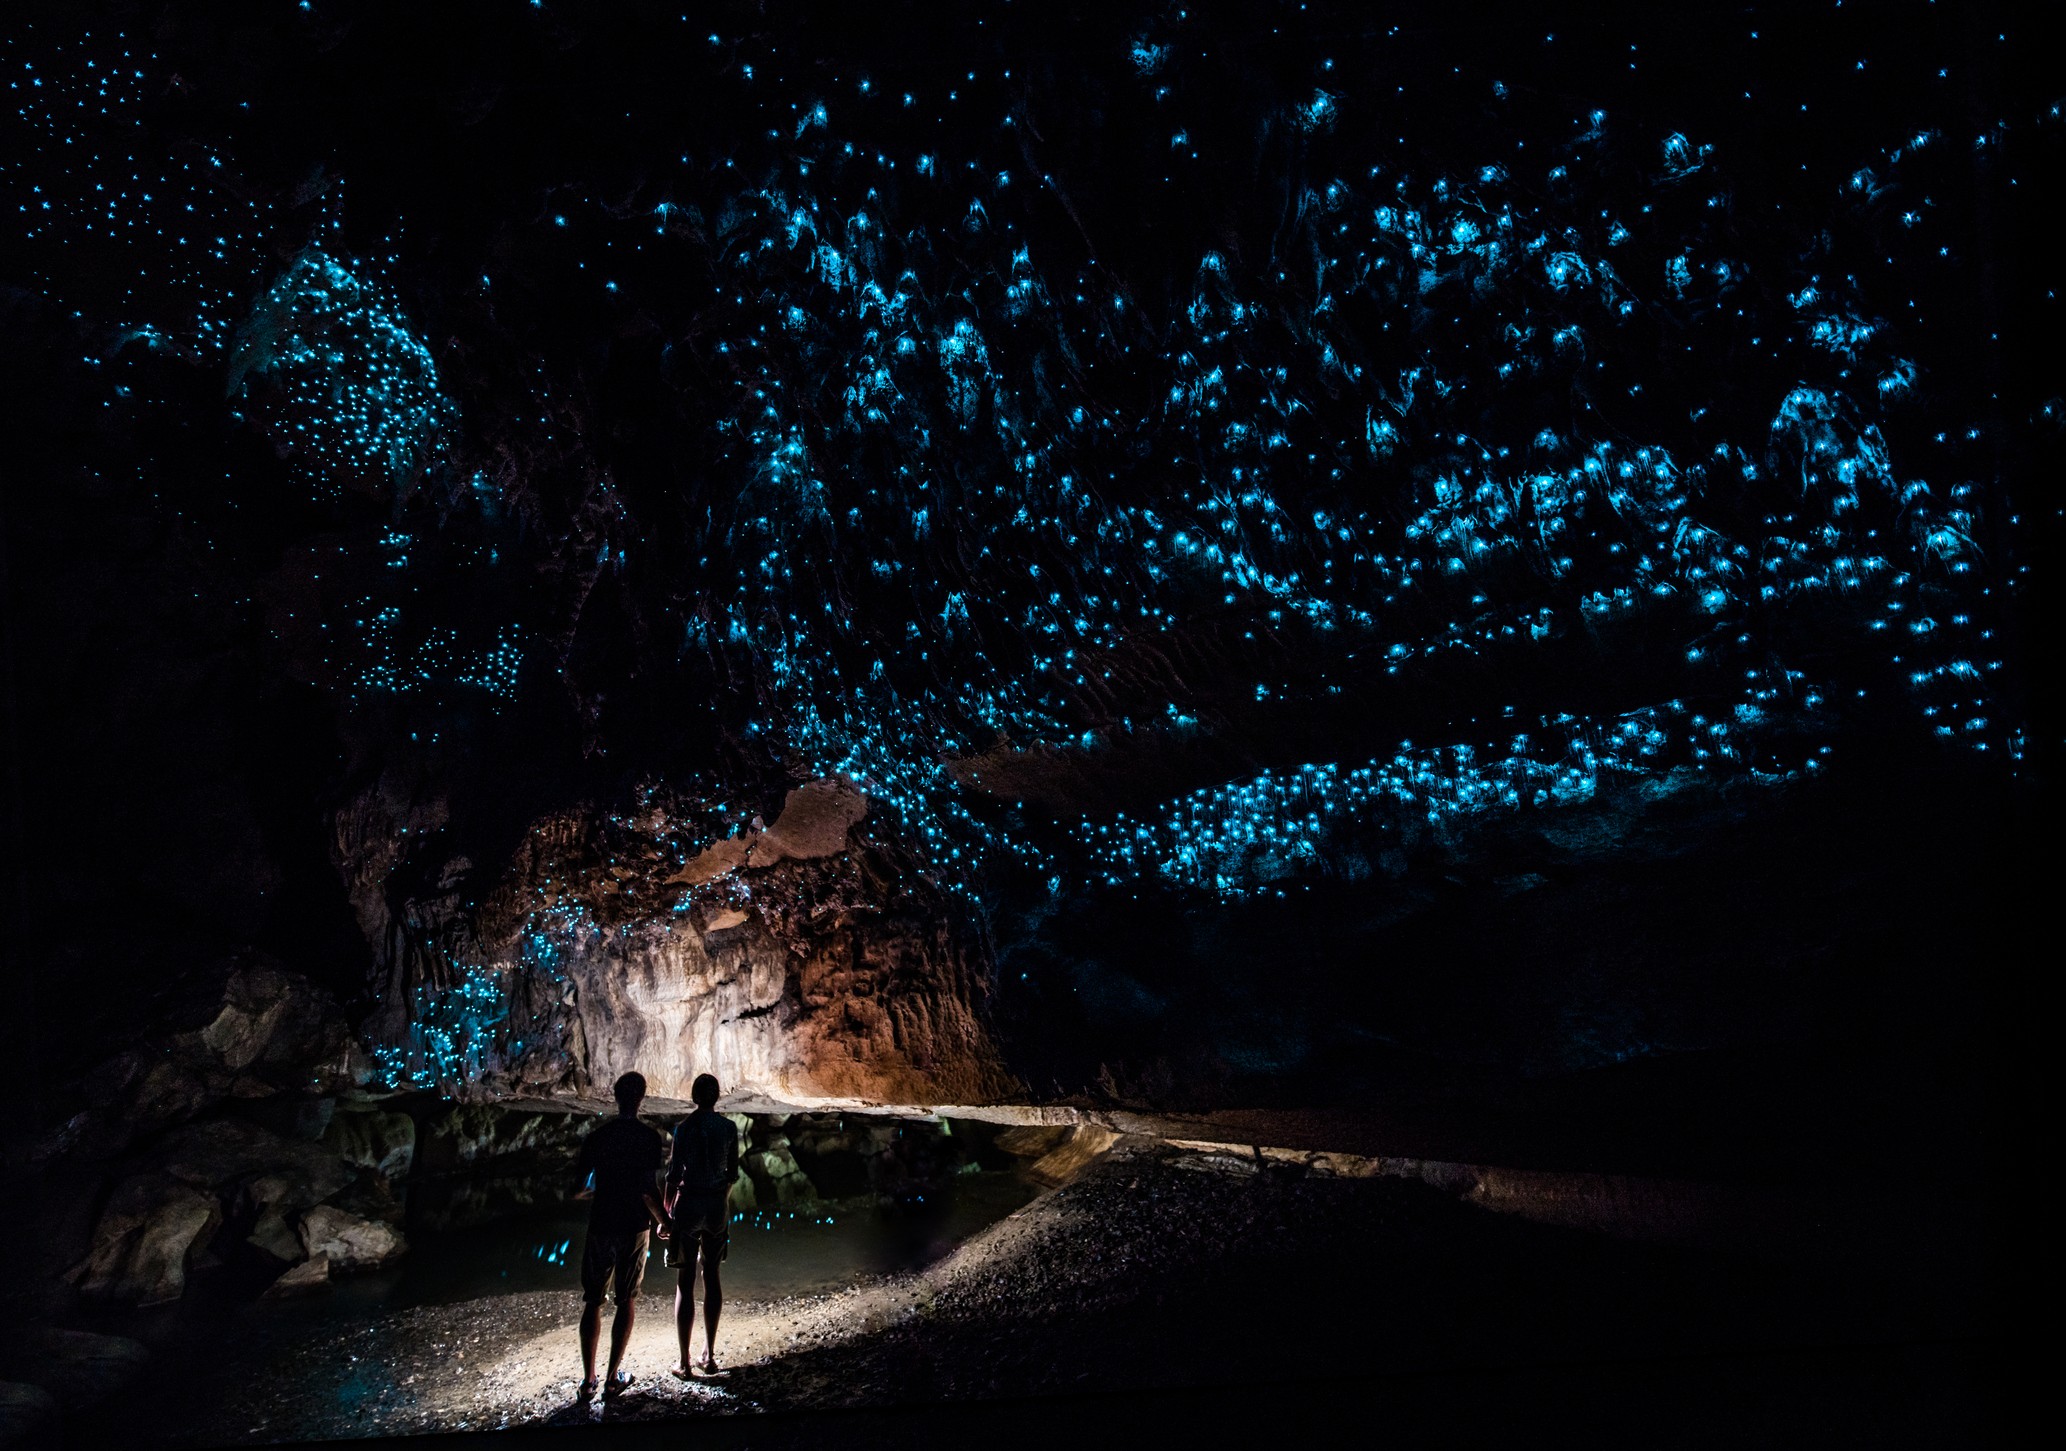 The Glow-worm Cathedral at the end of Waipu Cave in New Zealand